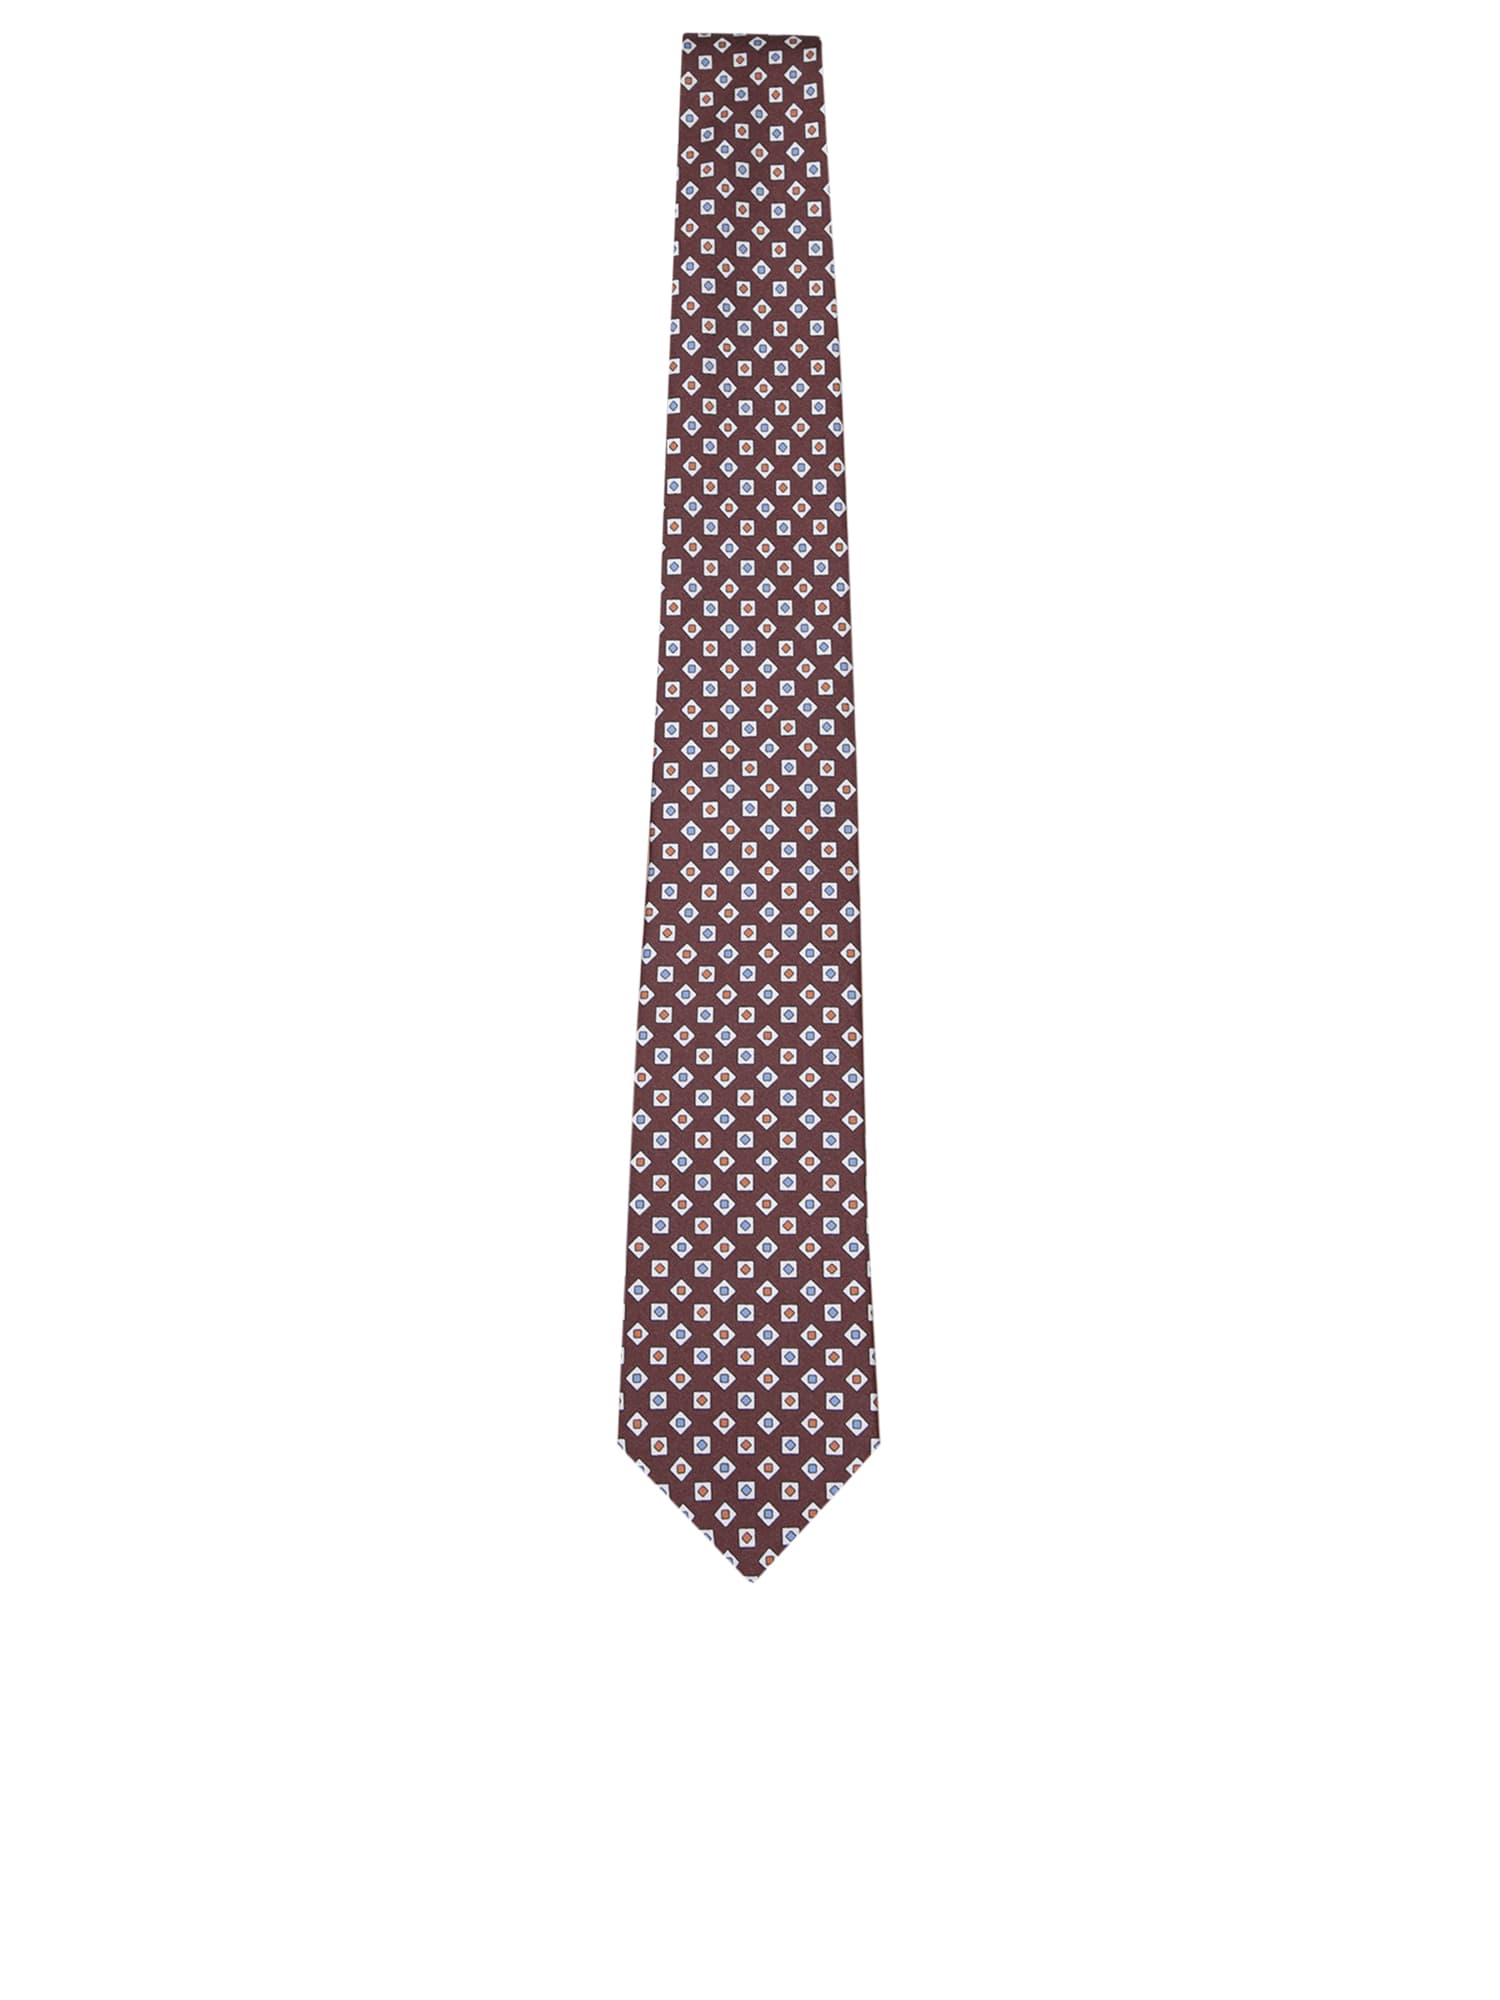 CANALI PATTERNED MULTICOLOR/BROWN TIE